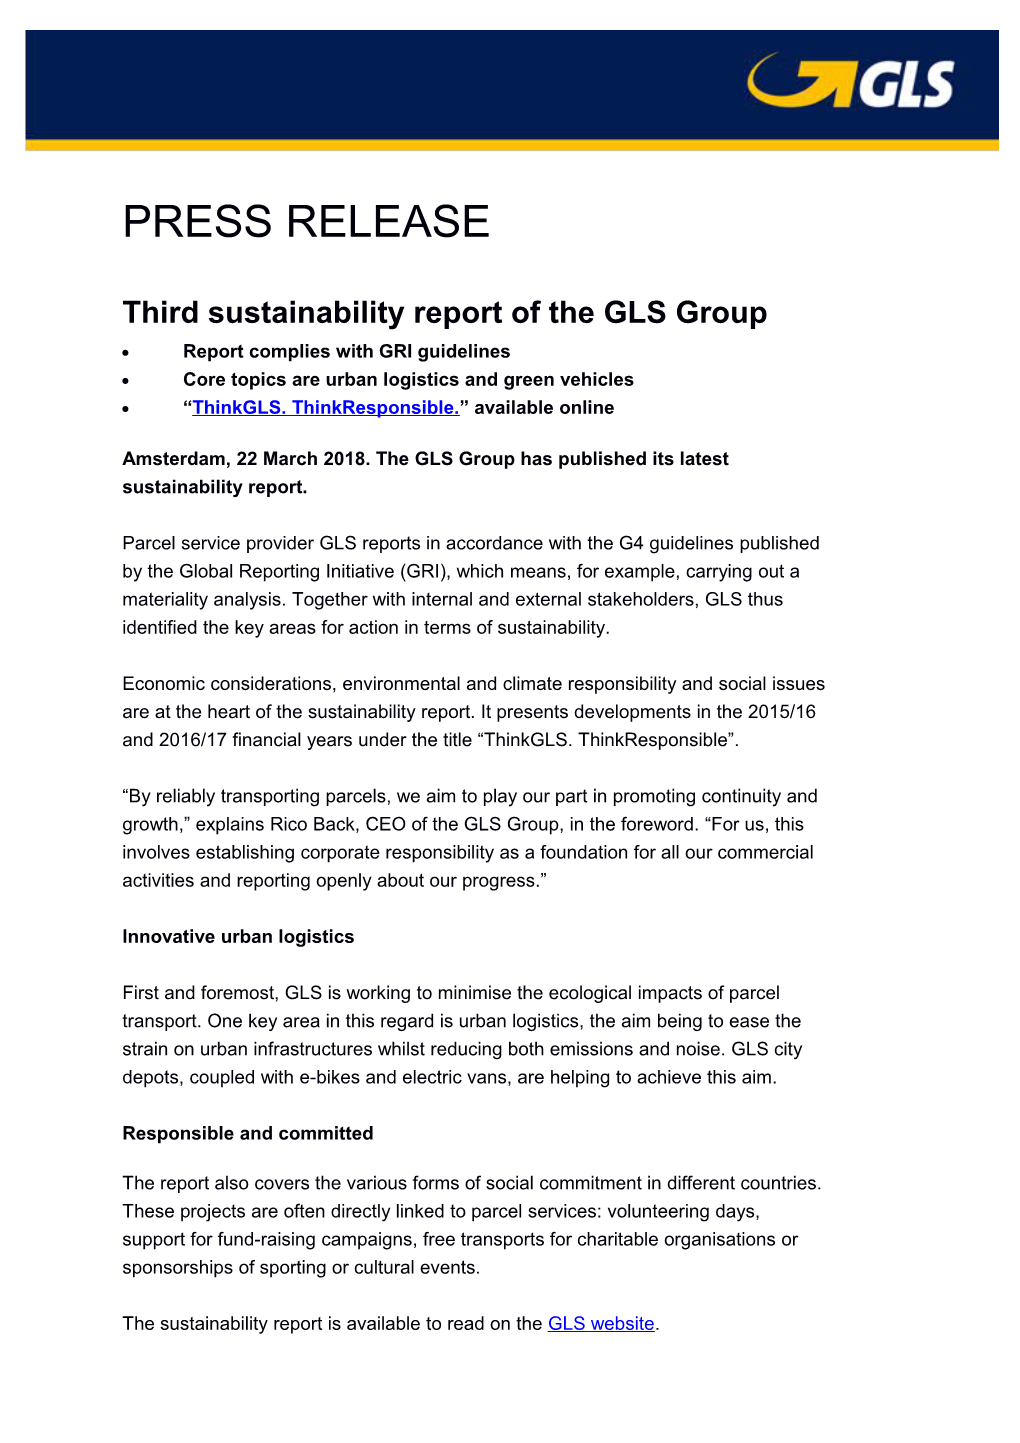 Third Sustainability Report of the GLS Group